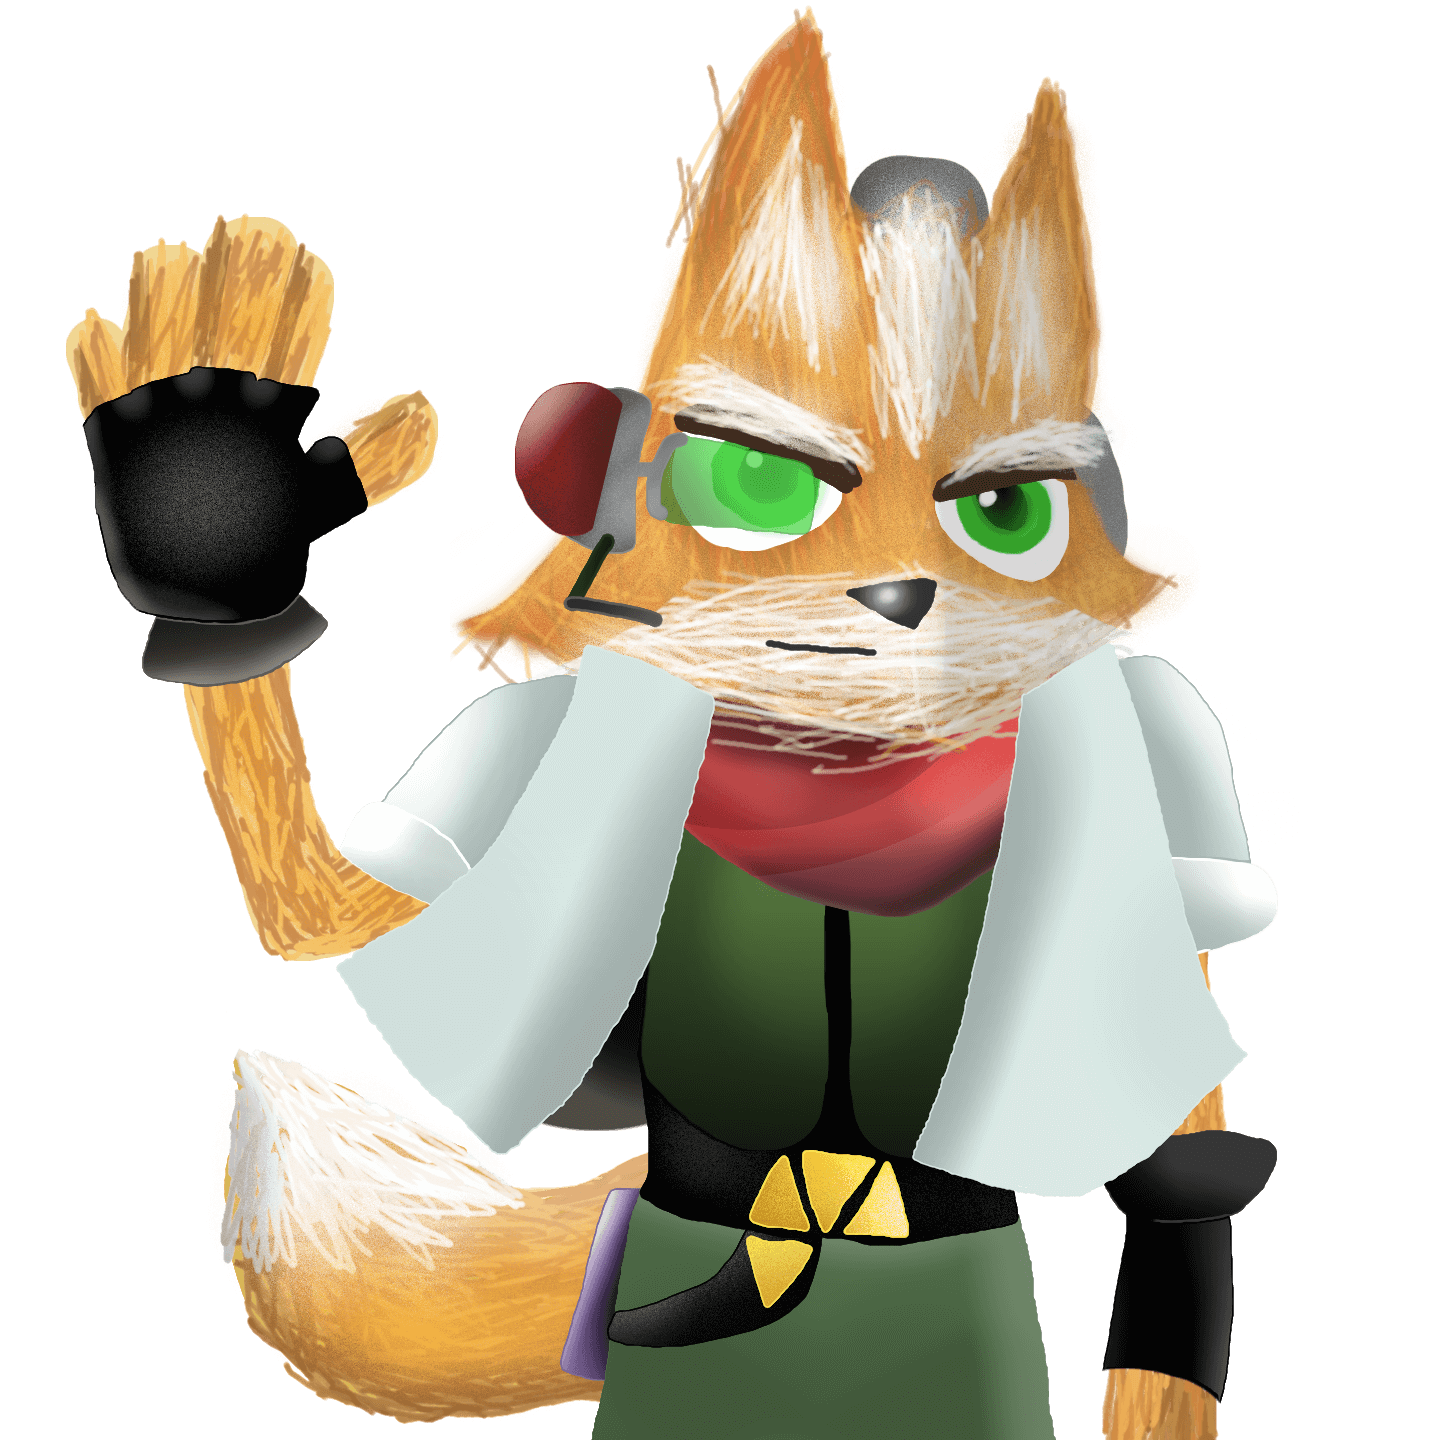 A drawing of Fox McCloud waving. Click through to its dedicated webpage for a more detailed description.